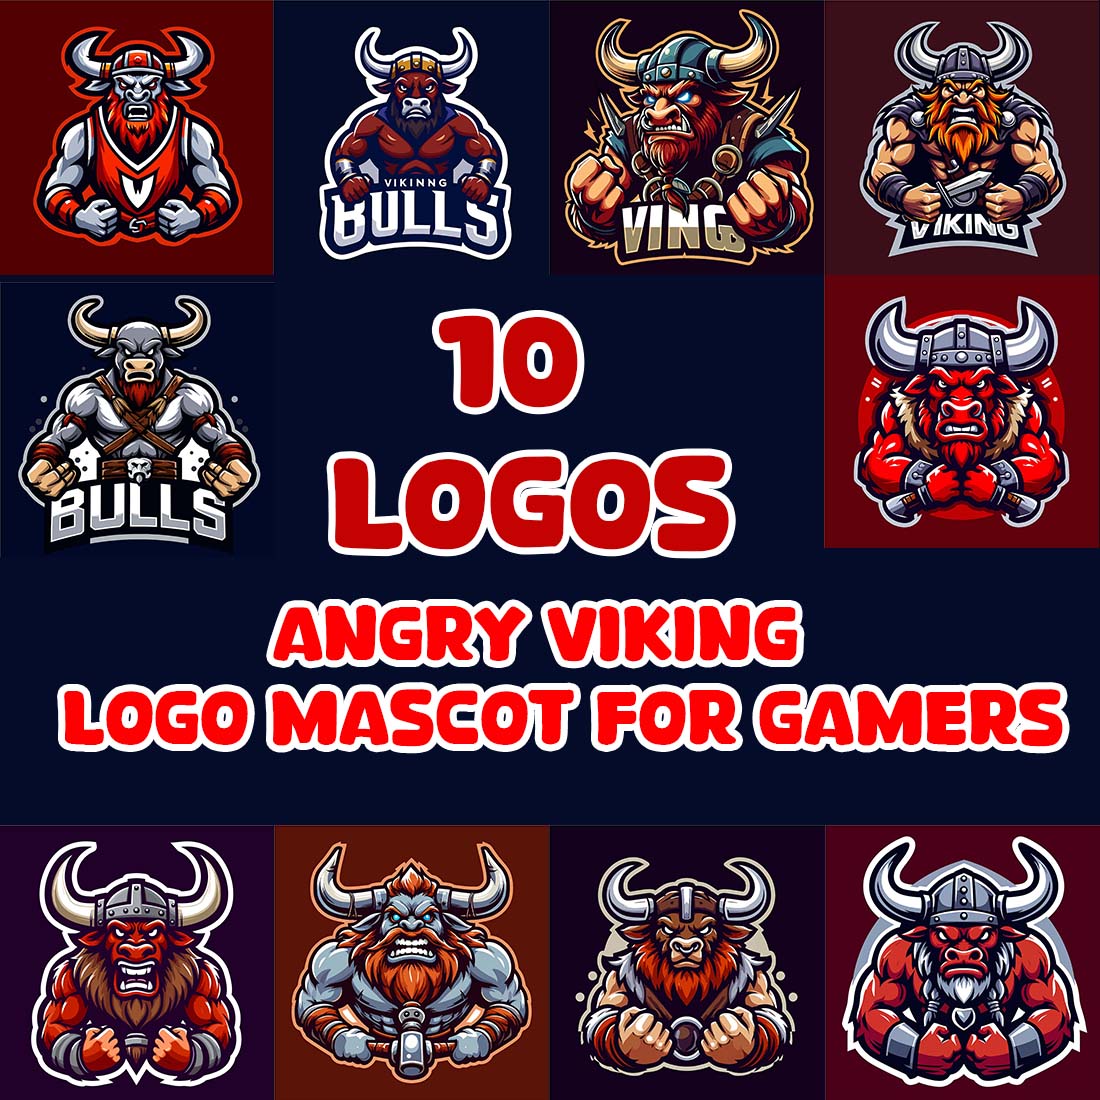 10 Angry viking logos mascot for gamers cover image.